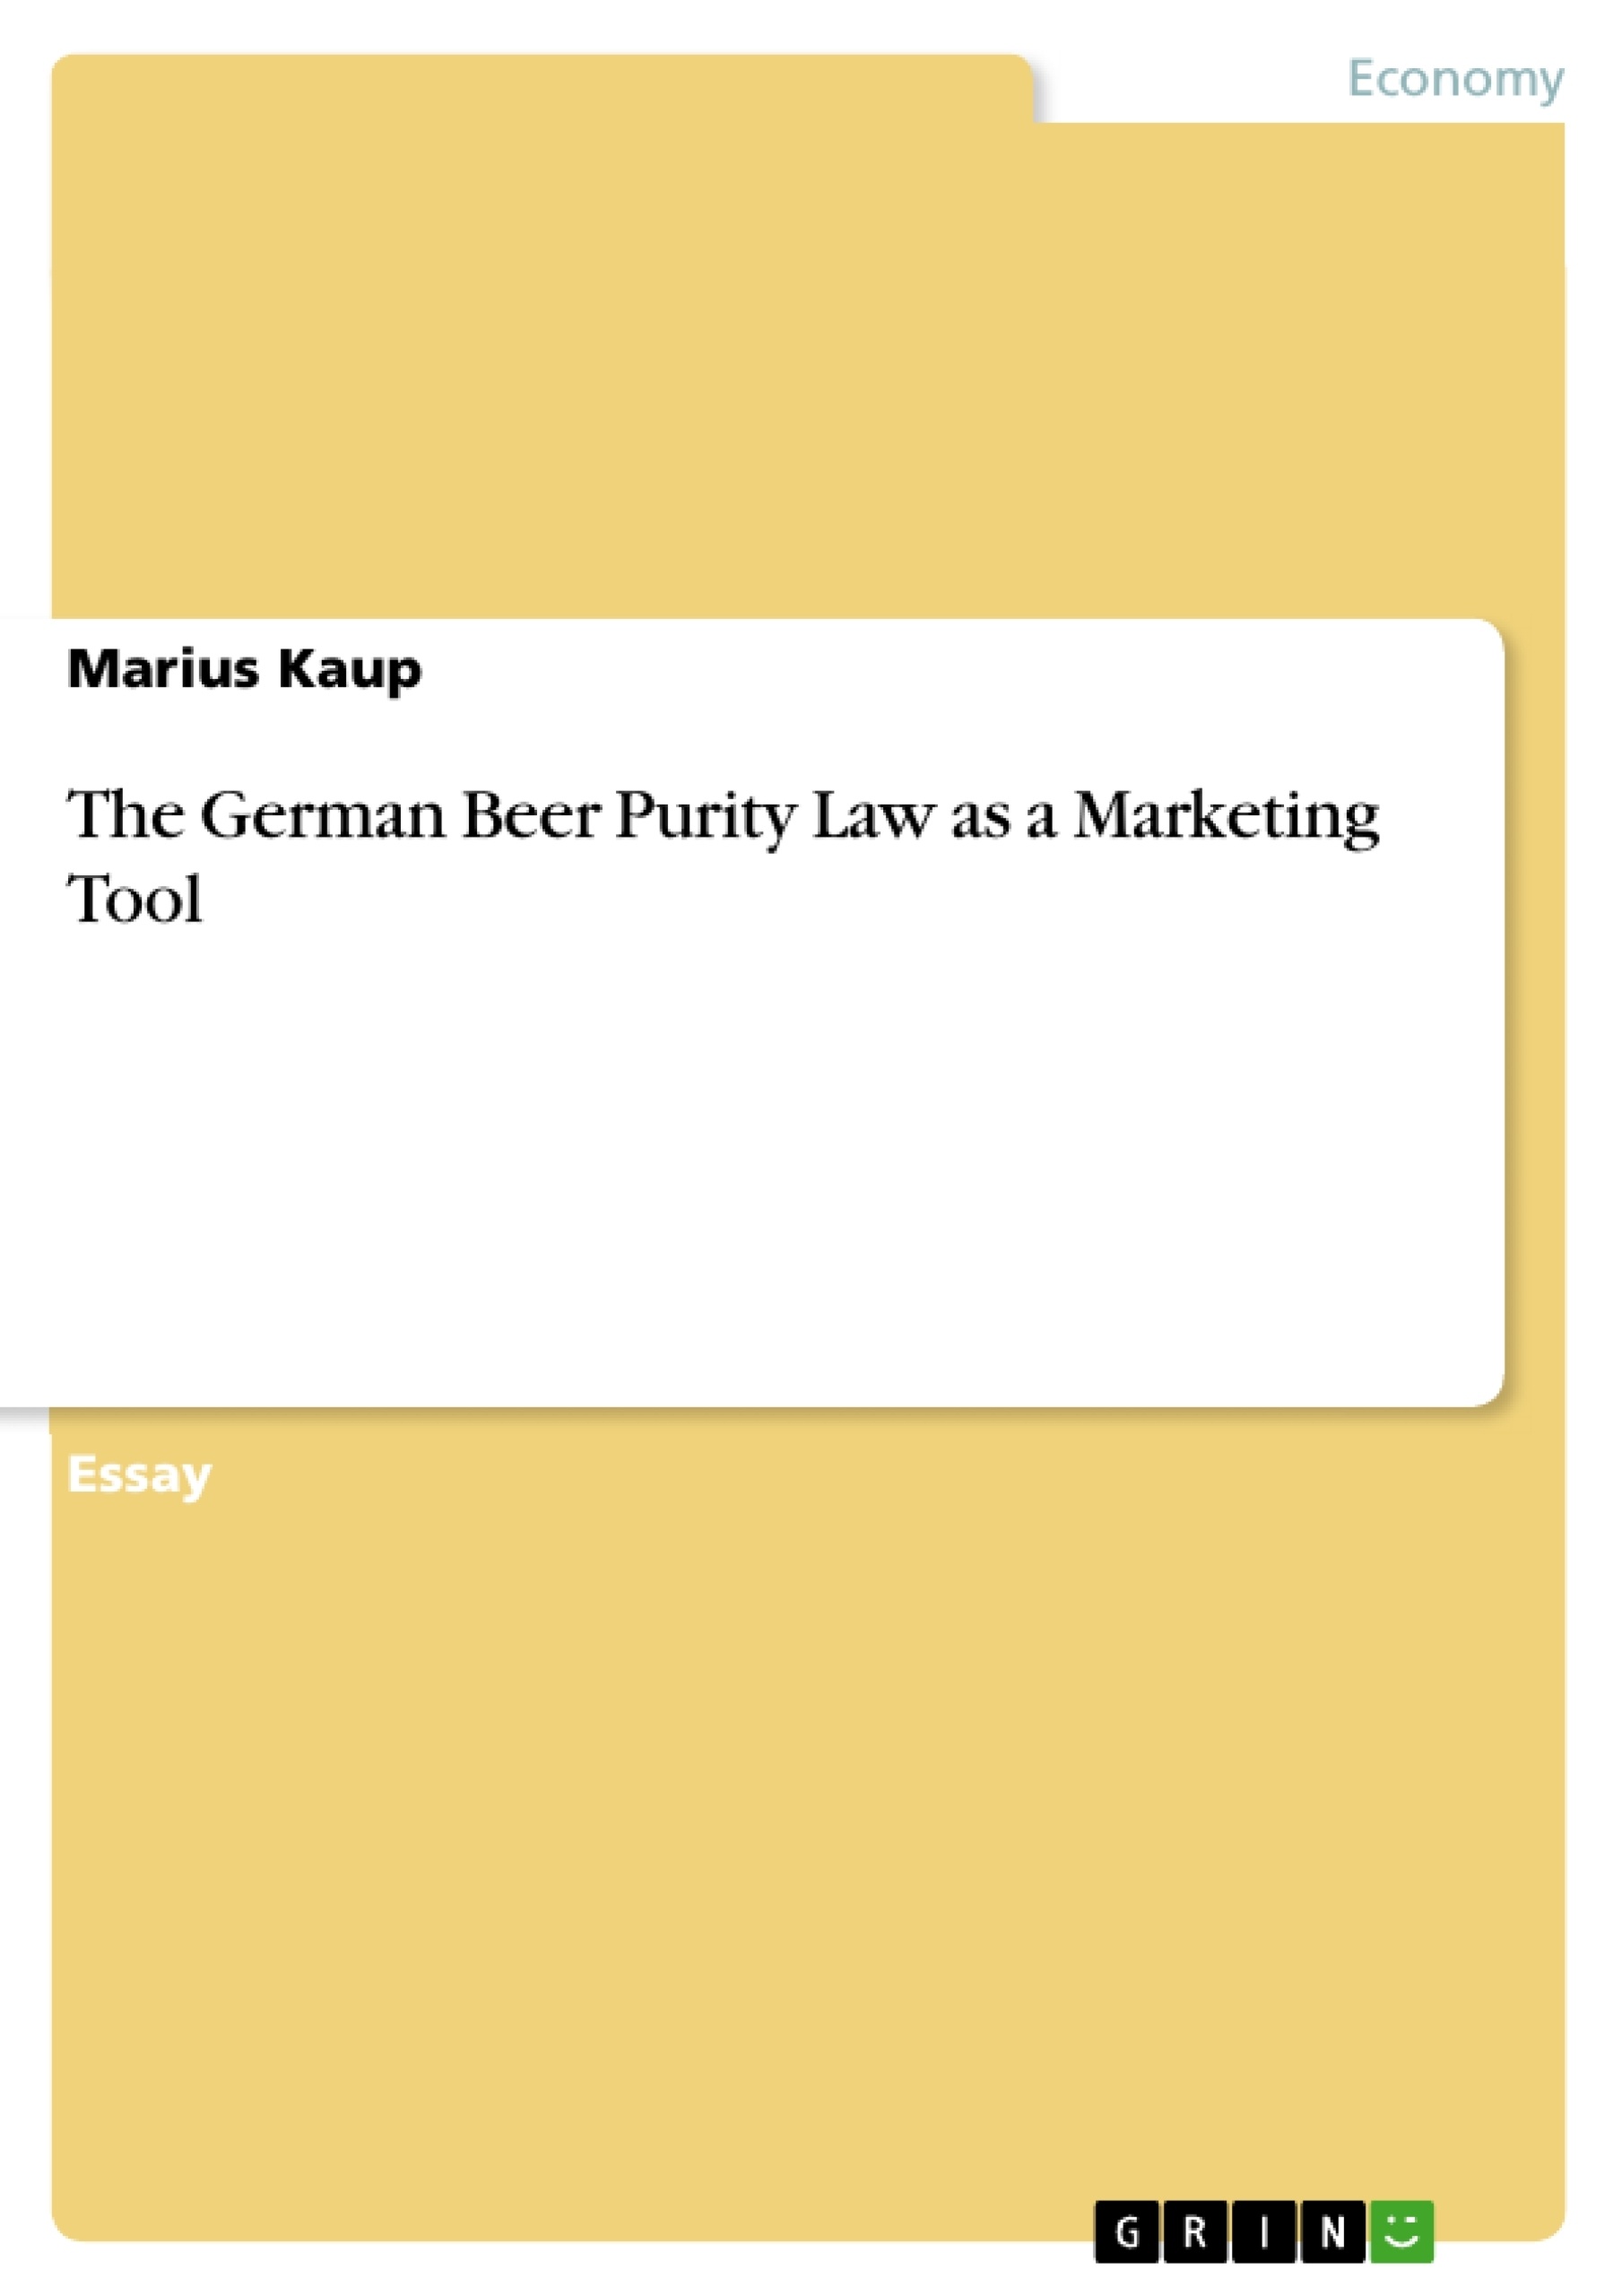 Titel: The German Beer Purity Law as a Marketing Tool